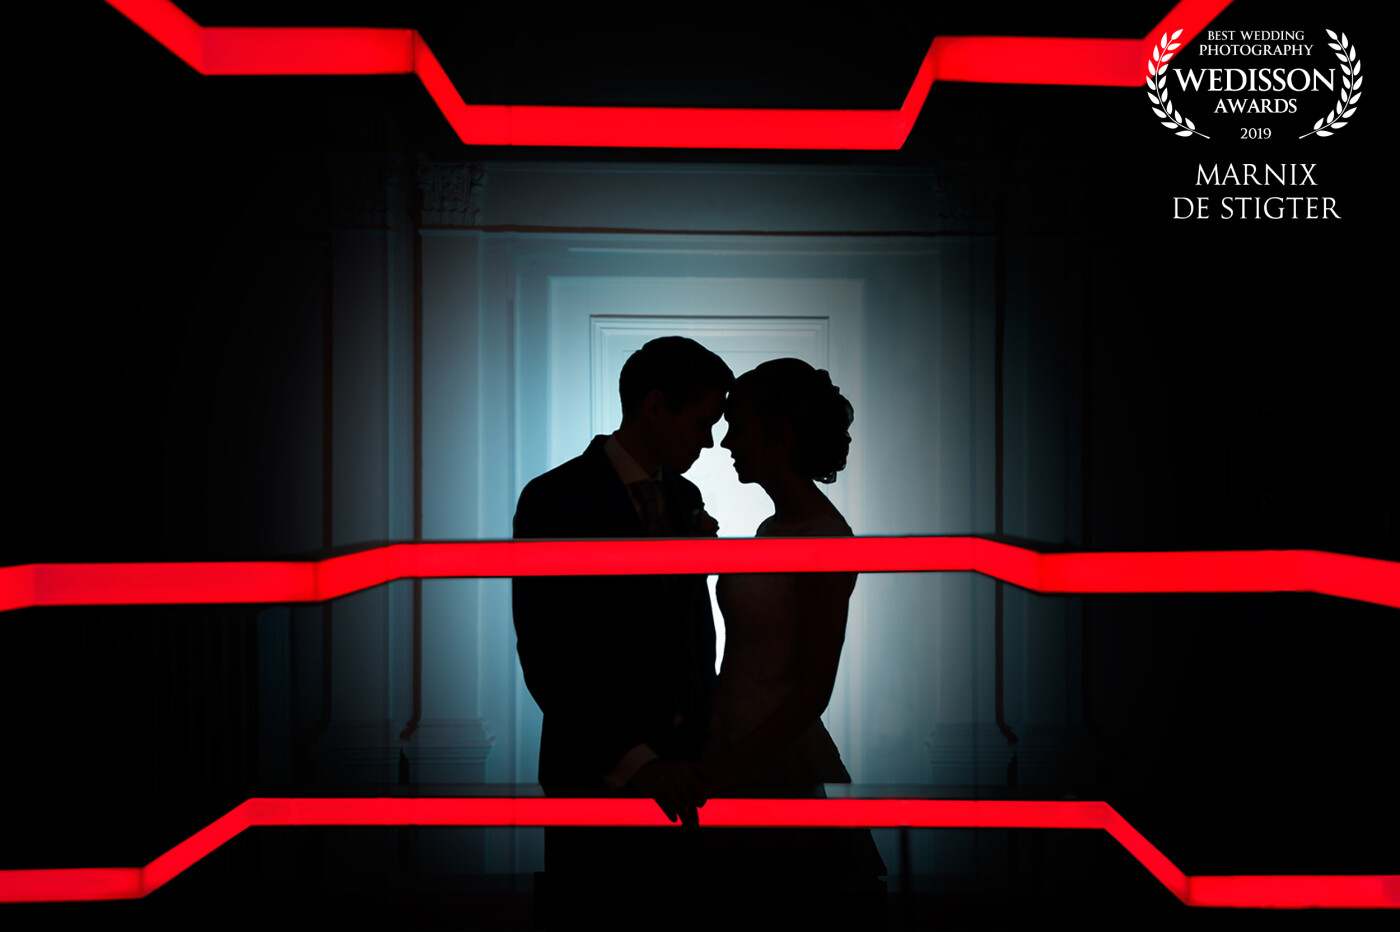 This wedding location had a crazy lighting structure on the second floor. I felt it was best to make use of their silhouettes and light up the background to have it complement the red strips of light. 